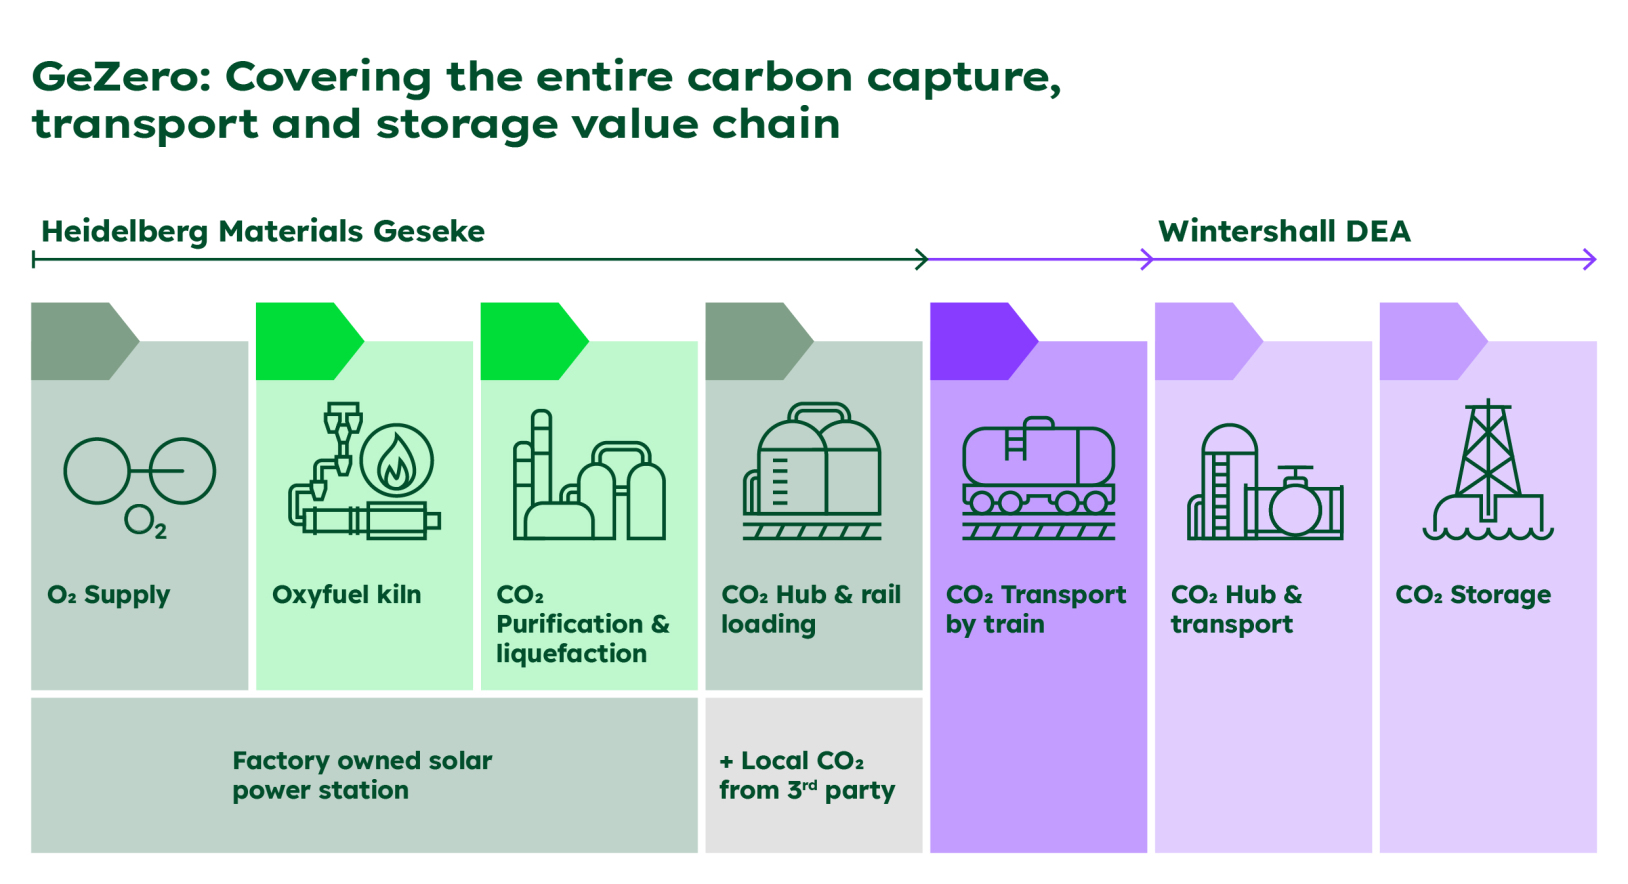 Infographic showing the carbon capture, transport and storage value chain of Geseke and Wintershall